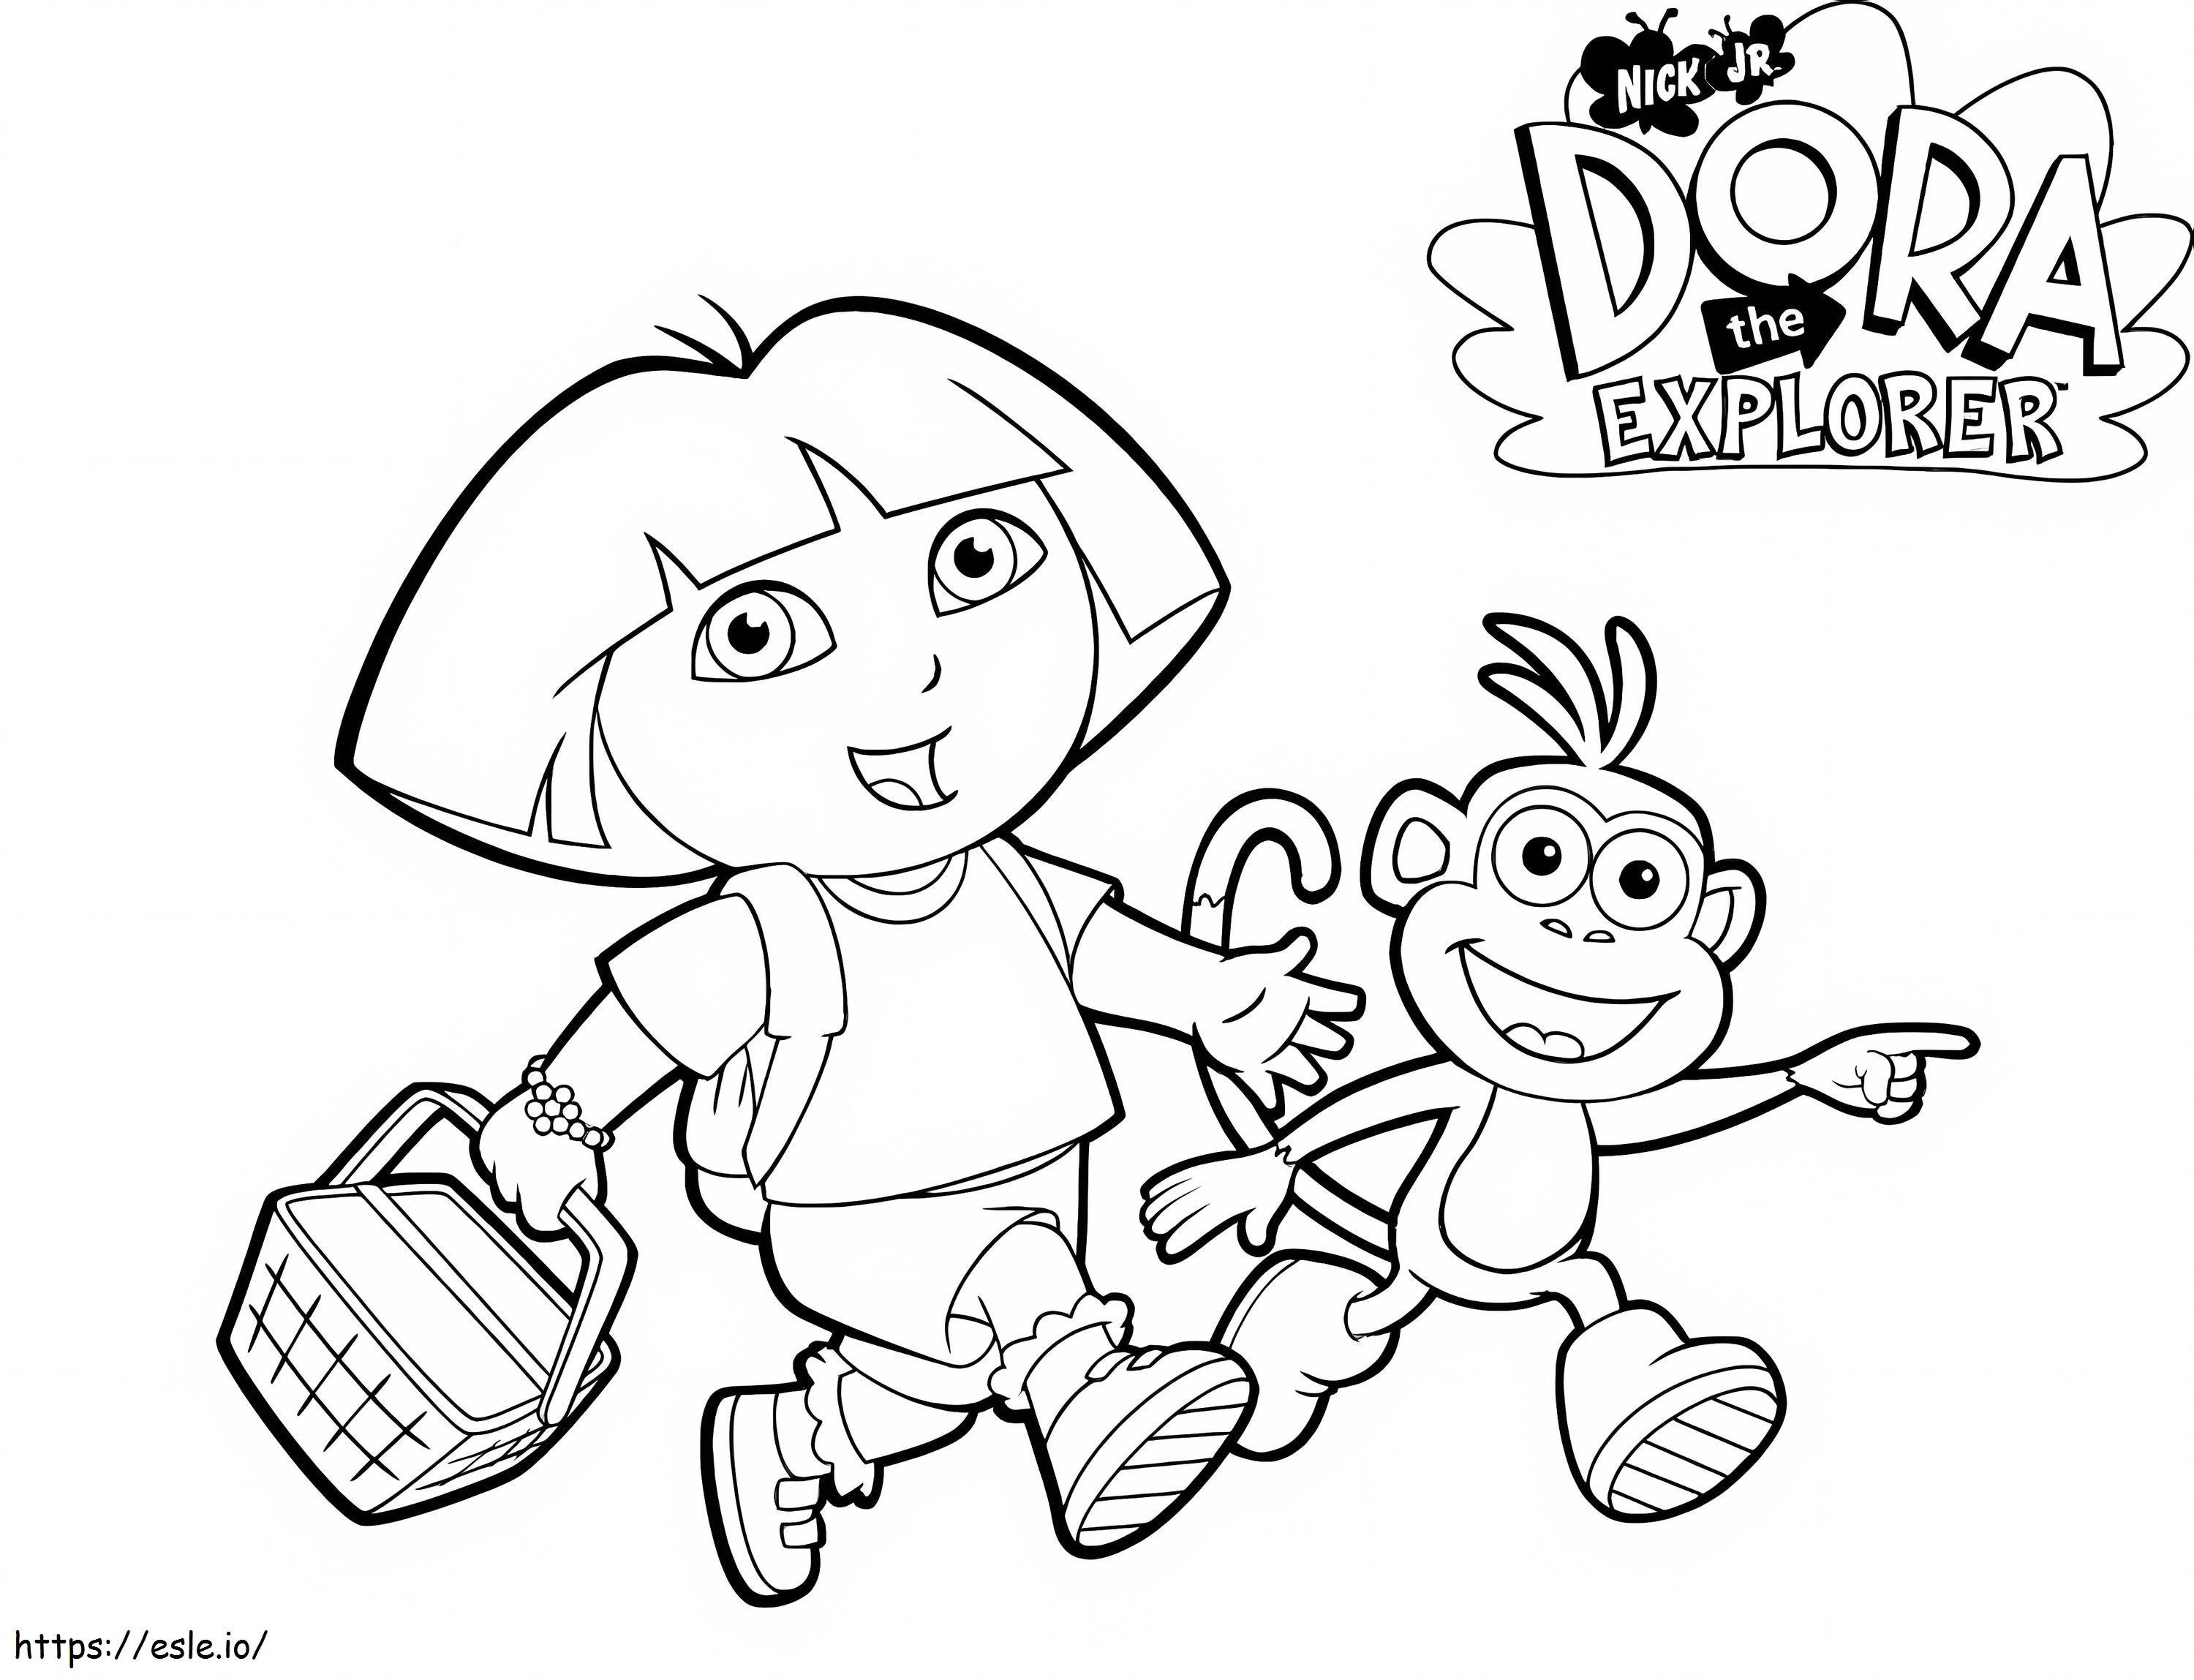 Dora And Boots Go Shopping coloring page